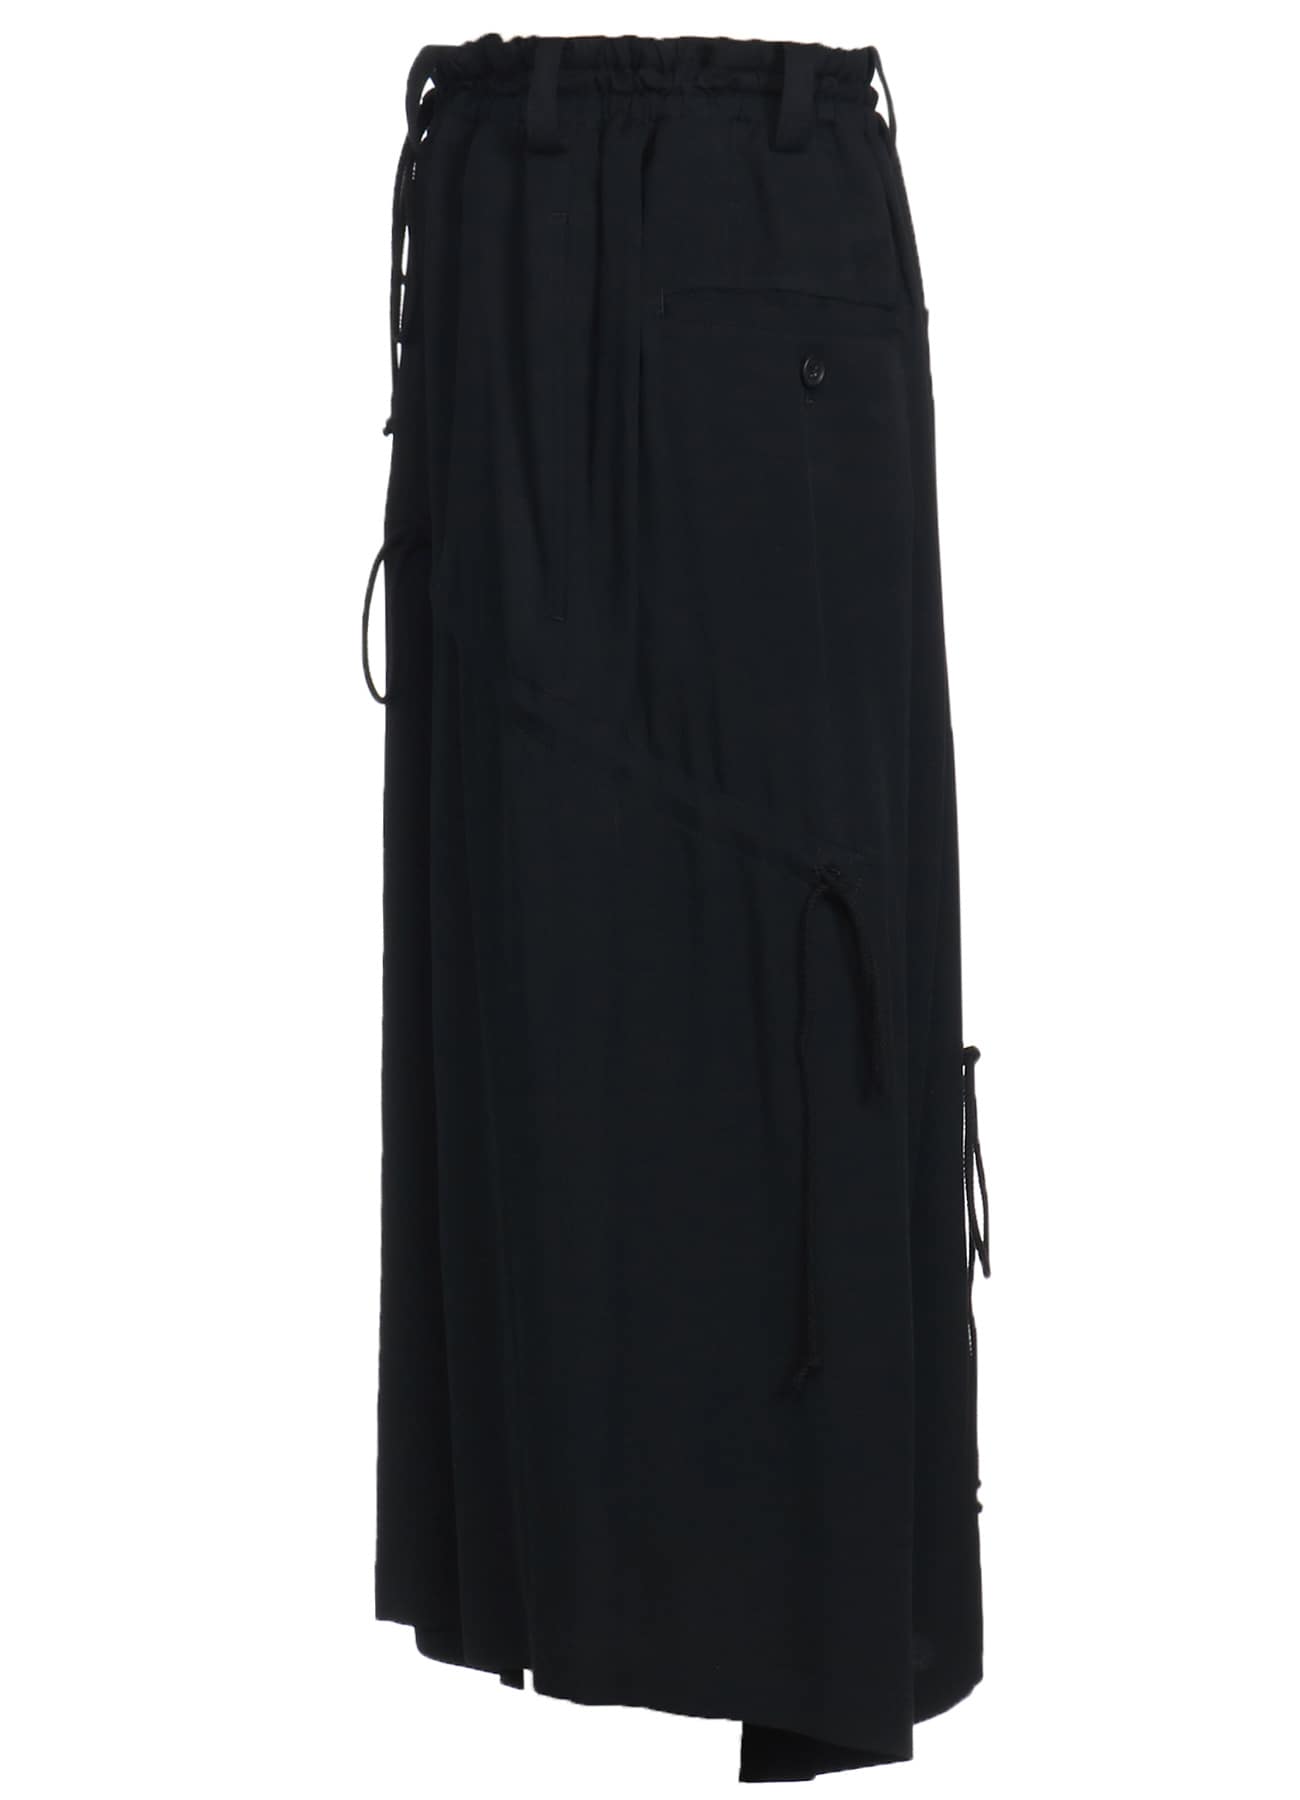 RAYON WASHER TWILL STRINGS GATHERED CROPPED PANTS